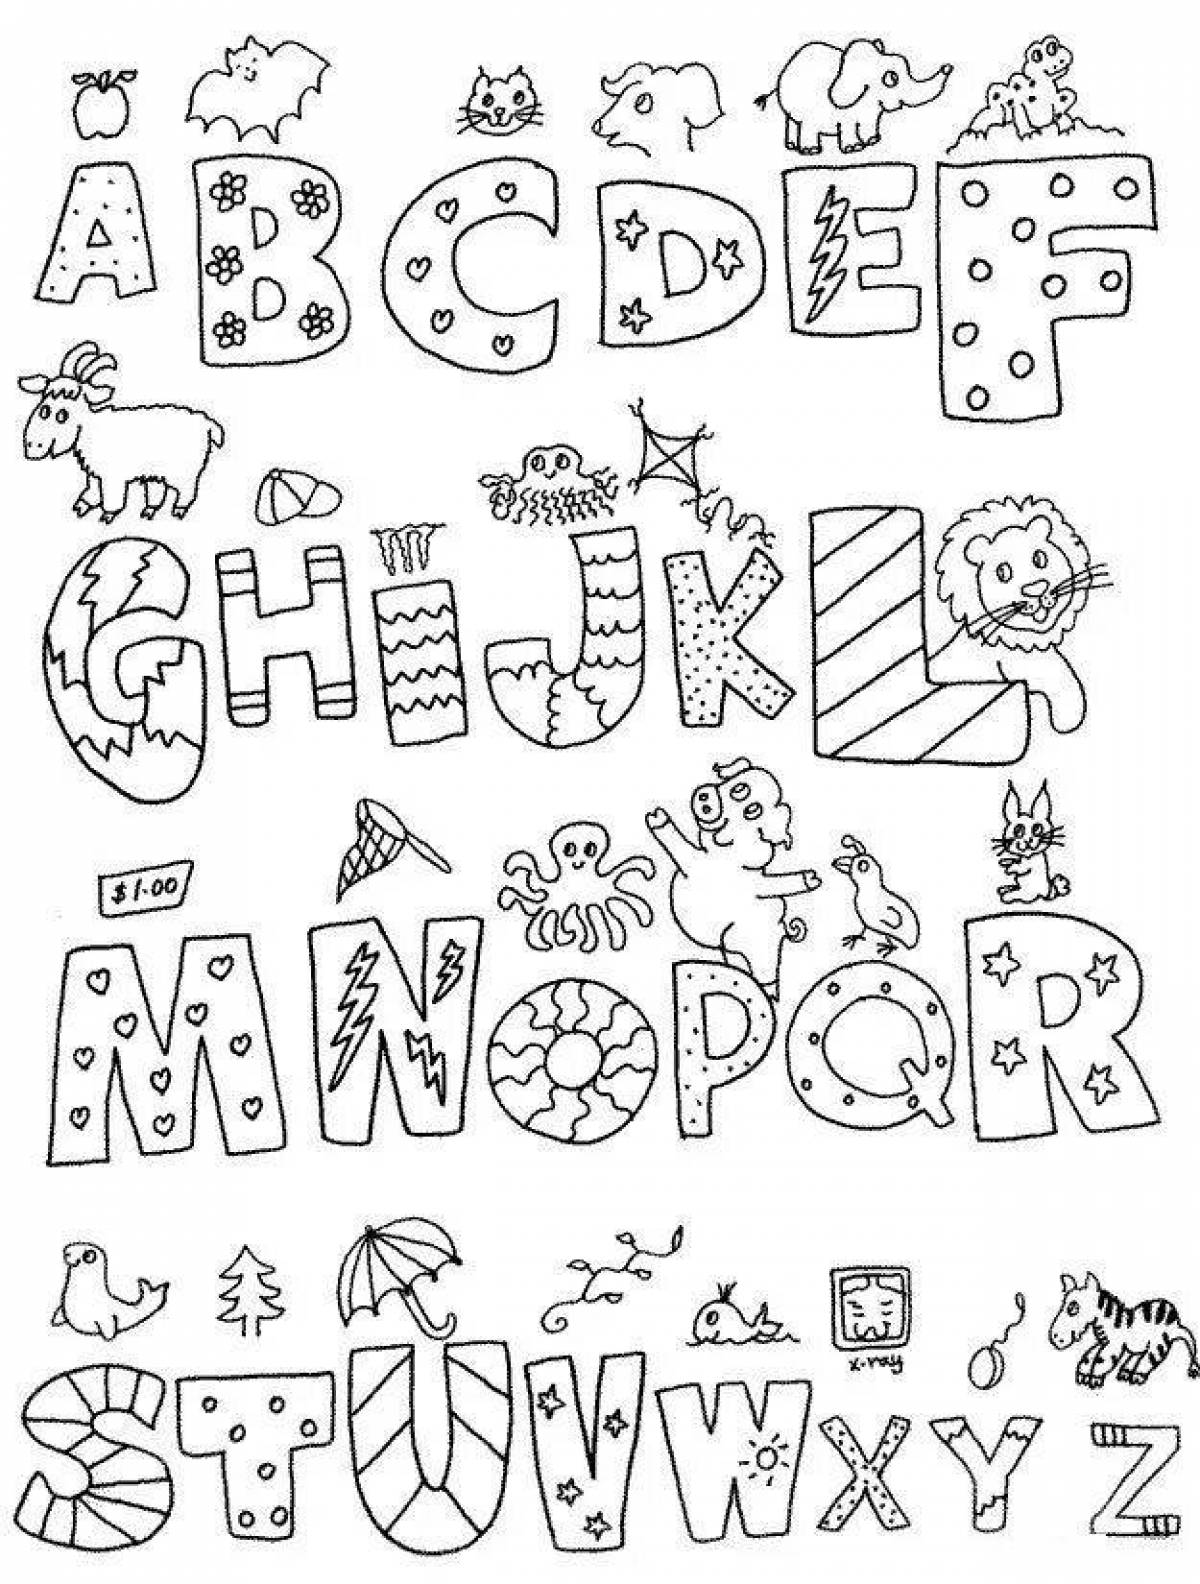 Vivacious coloring page english alphabet with eyes